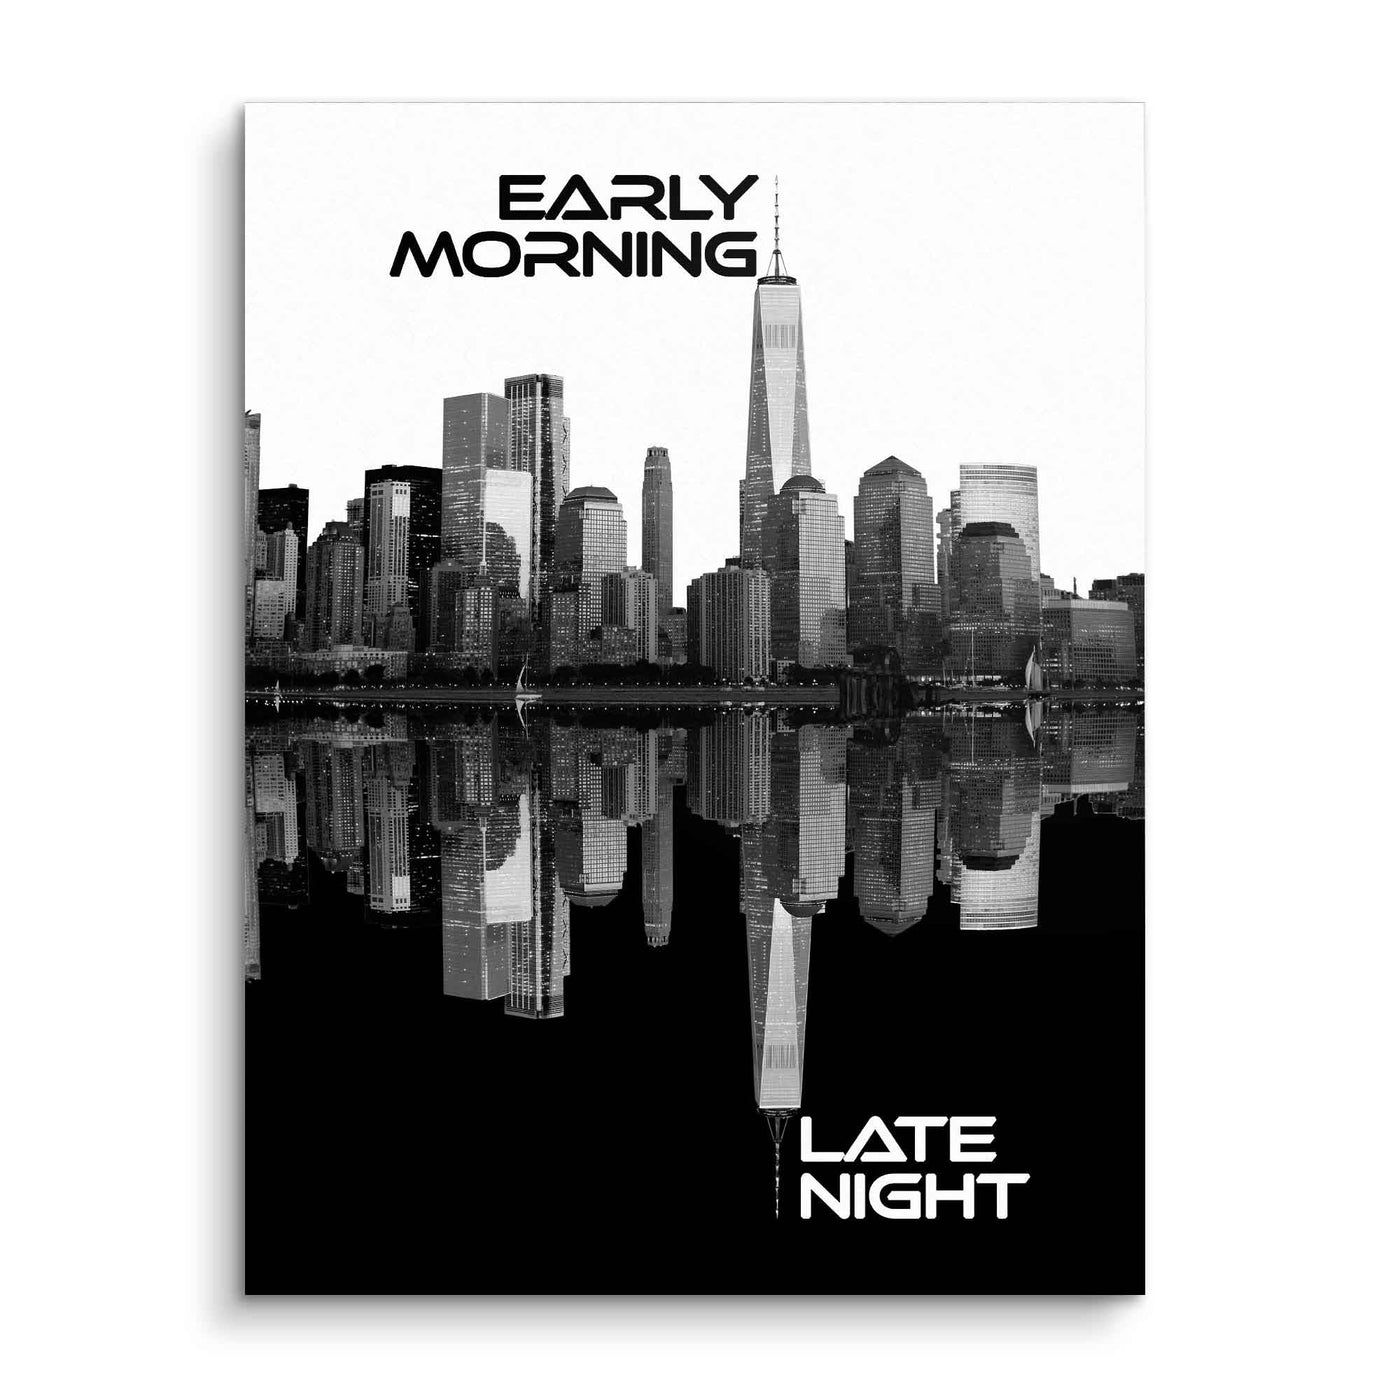 Early morning - late night